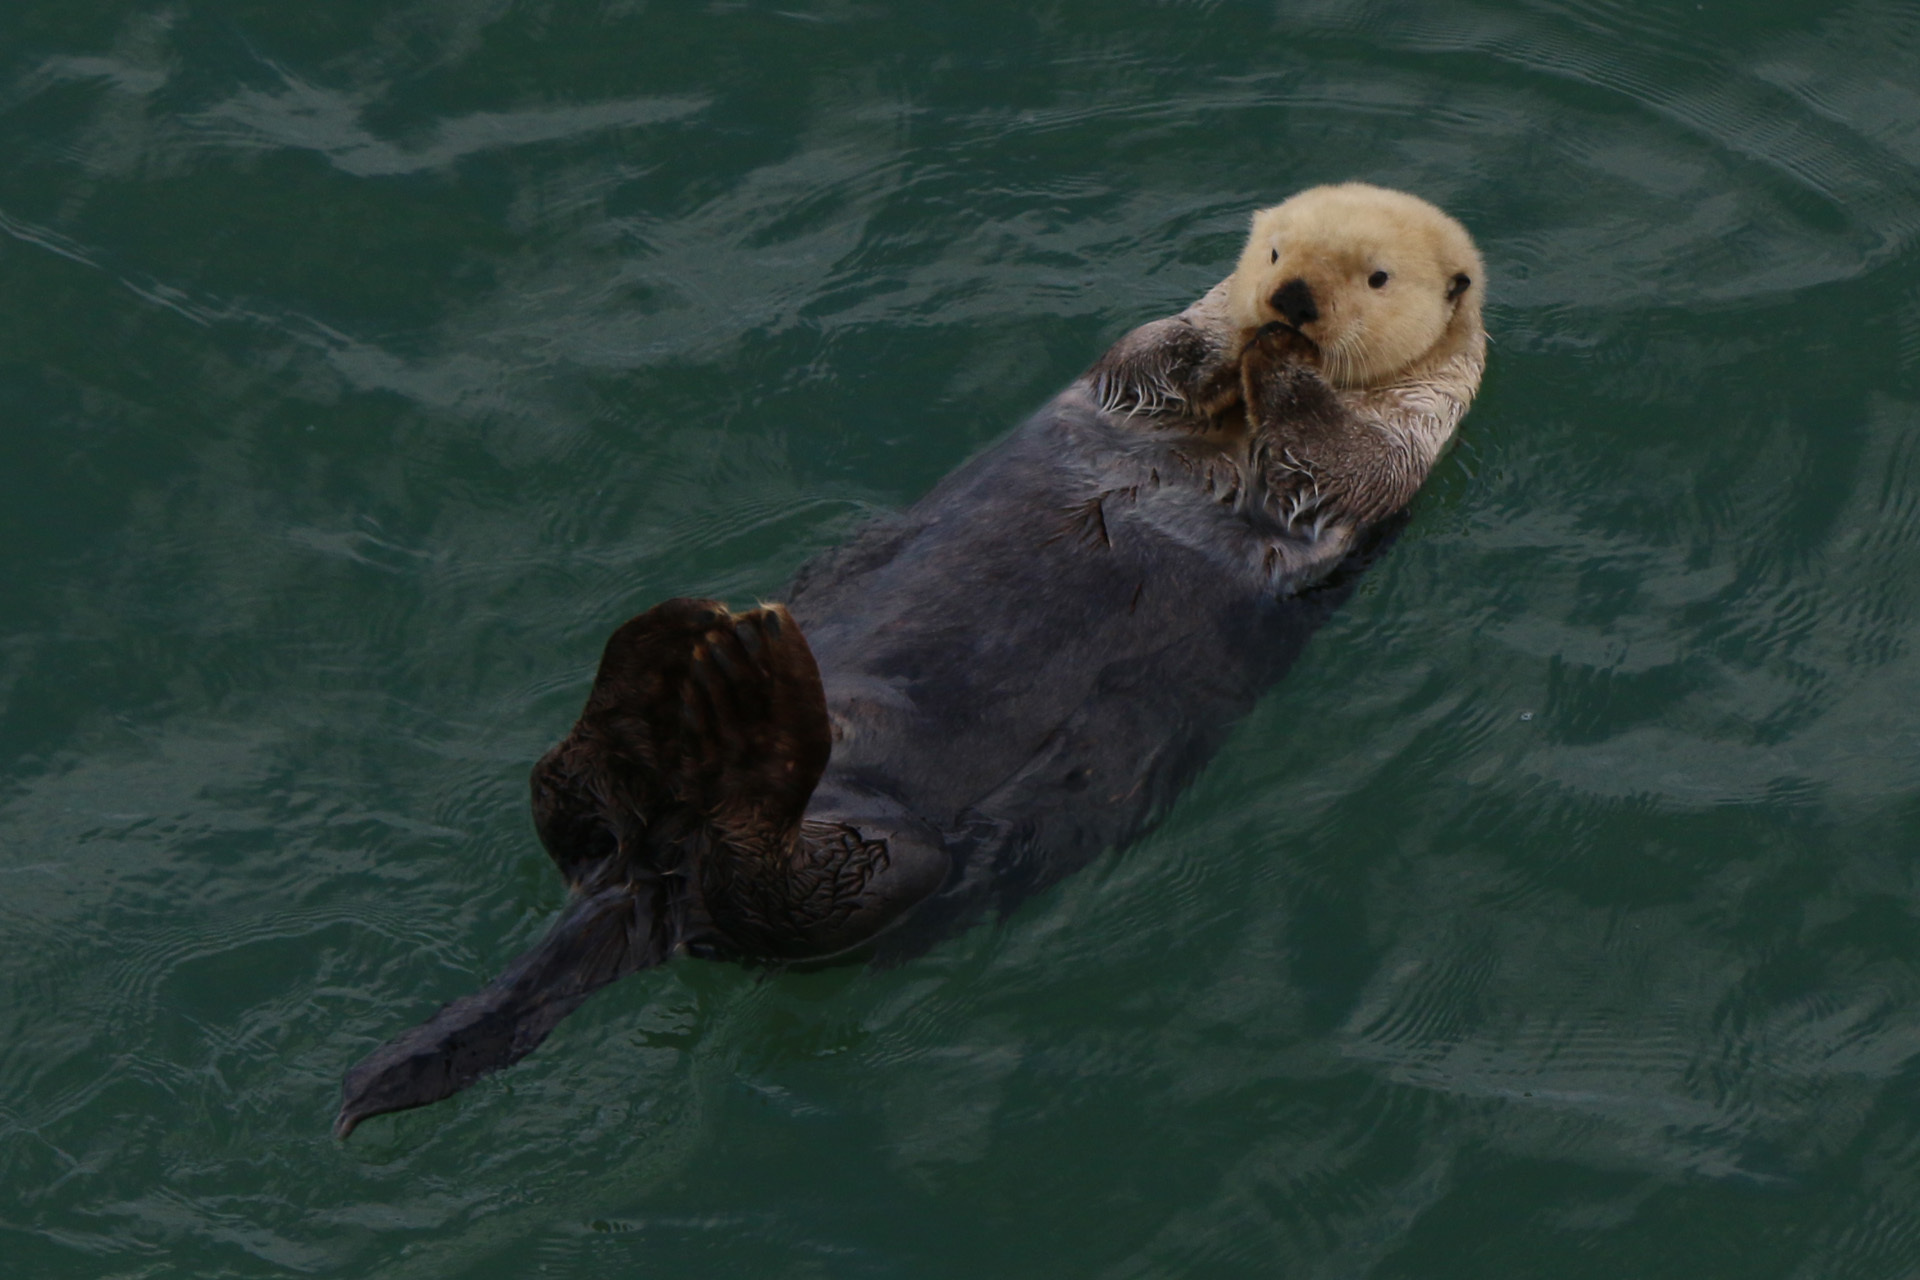 A sea otter floats on it's back in teal ocean water